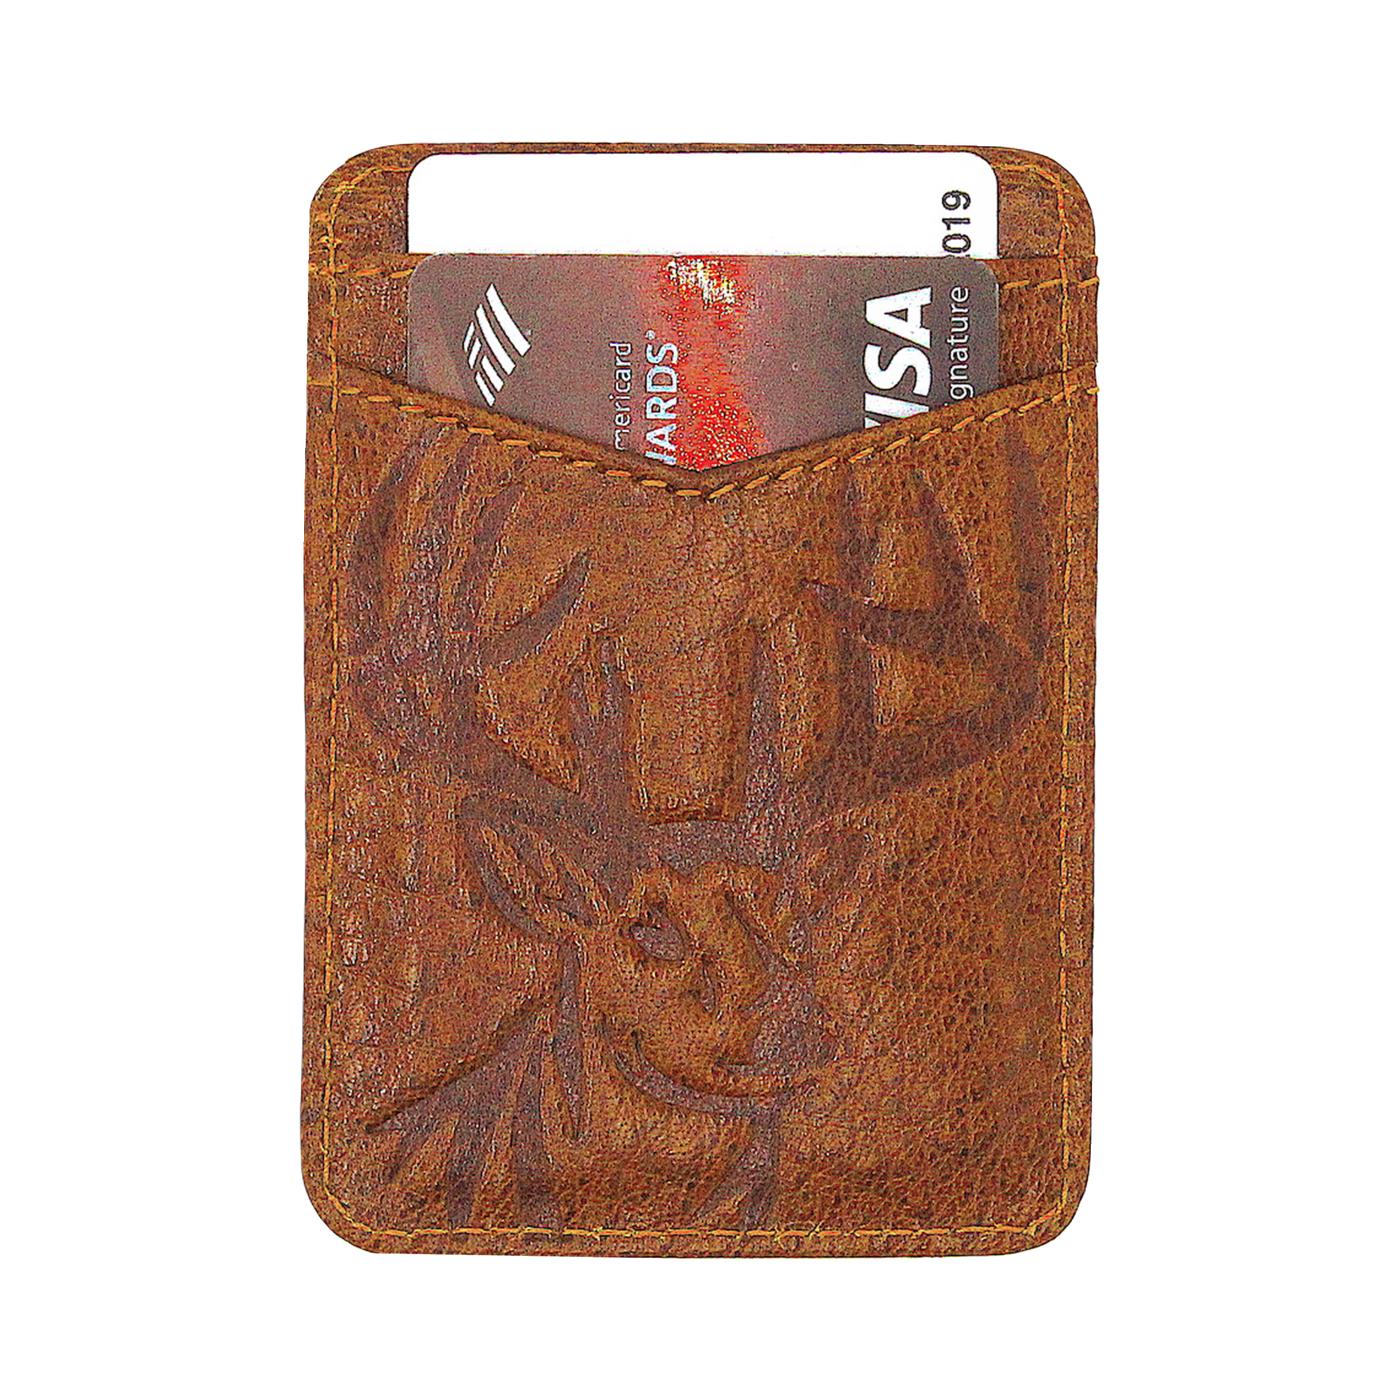 Every minimalist needs a wallet that is going to carry the essentials. Look no further than the Pursuit Front Pocket Buck Money Clip, created from premier full grain leather and containing a bold stylish hand-dyed color. Great piece for any collection. Features: 2 Card Slots, Strong Magnetic Closure Ultra Slim Minimalist & Modern Design Stylish Debossed Buck Magnetic Clip Holds 10+ Bills Dimensions: 4"L x 2.8"H RFID Protection Color: Golden